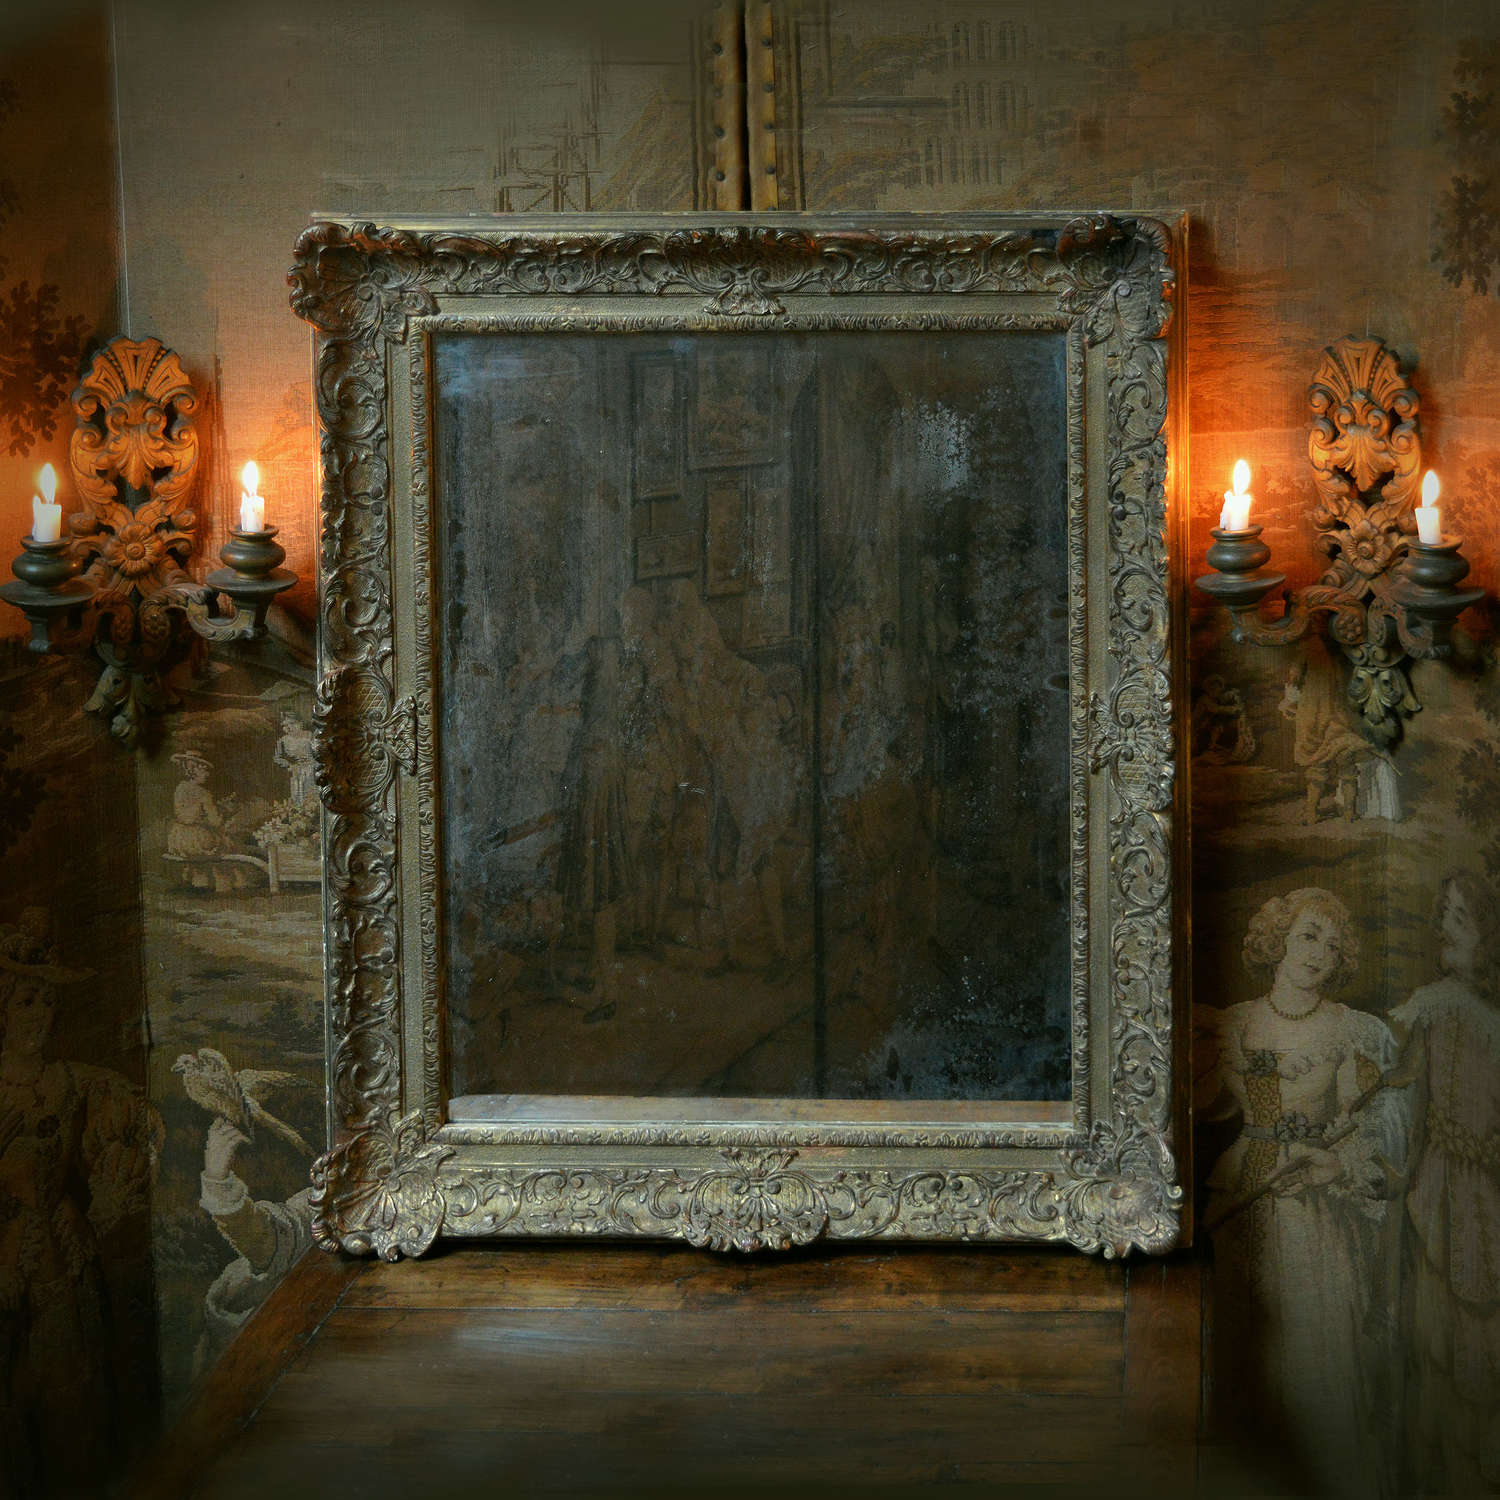 Late 18th/ early 19th Century Louis XIV style mirror